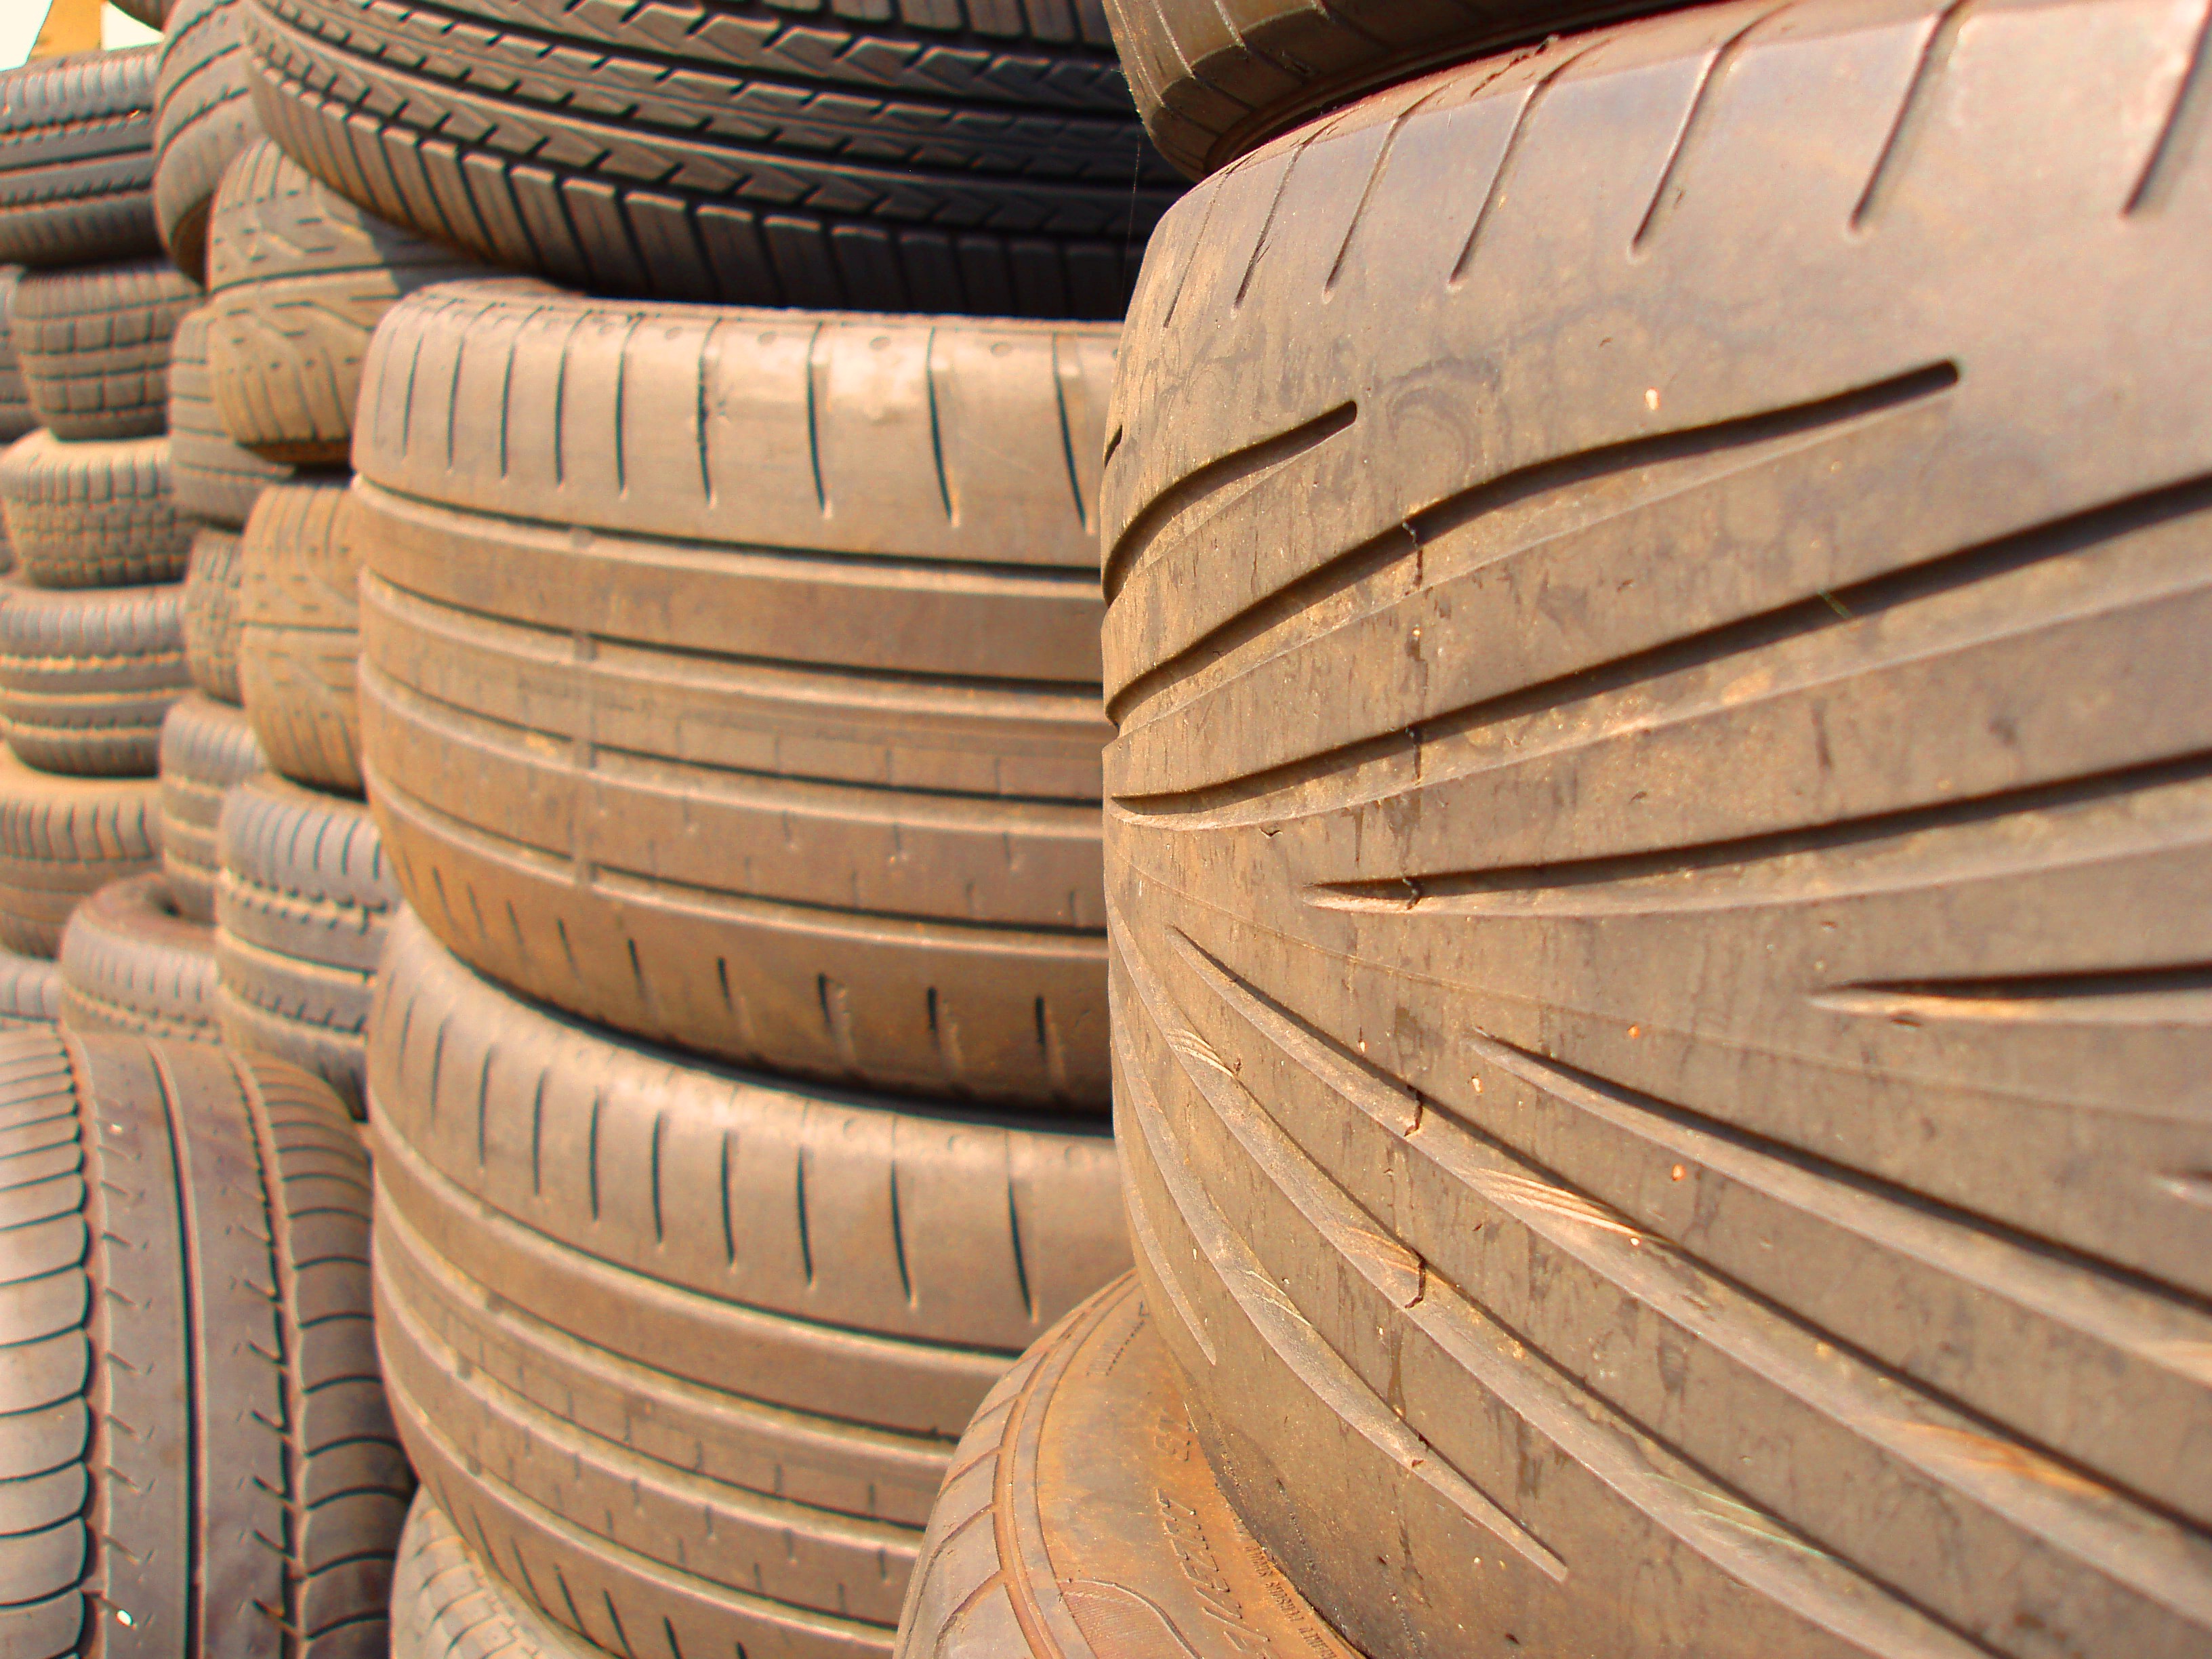 UK tyre retailers continue right-sizing